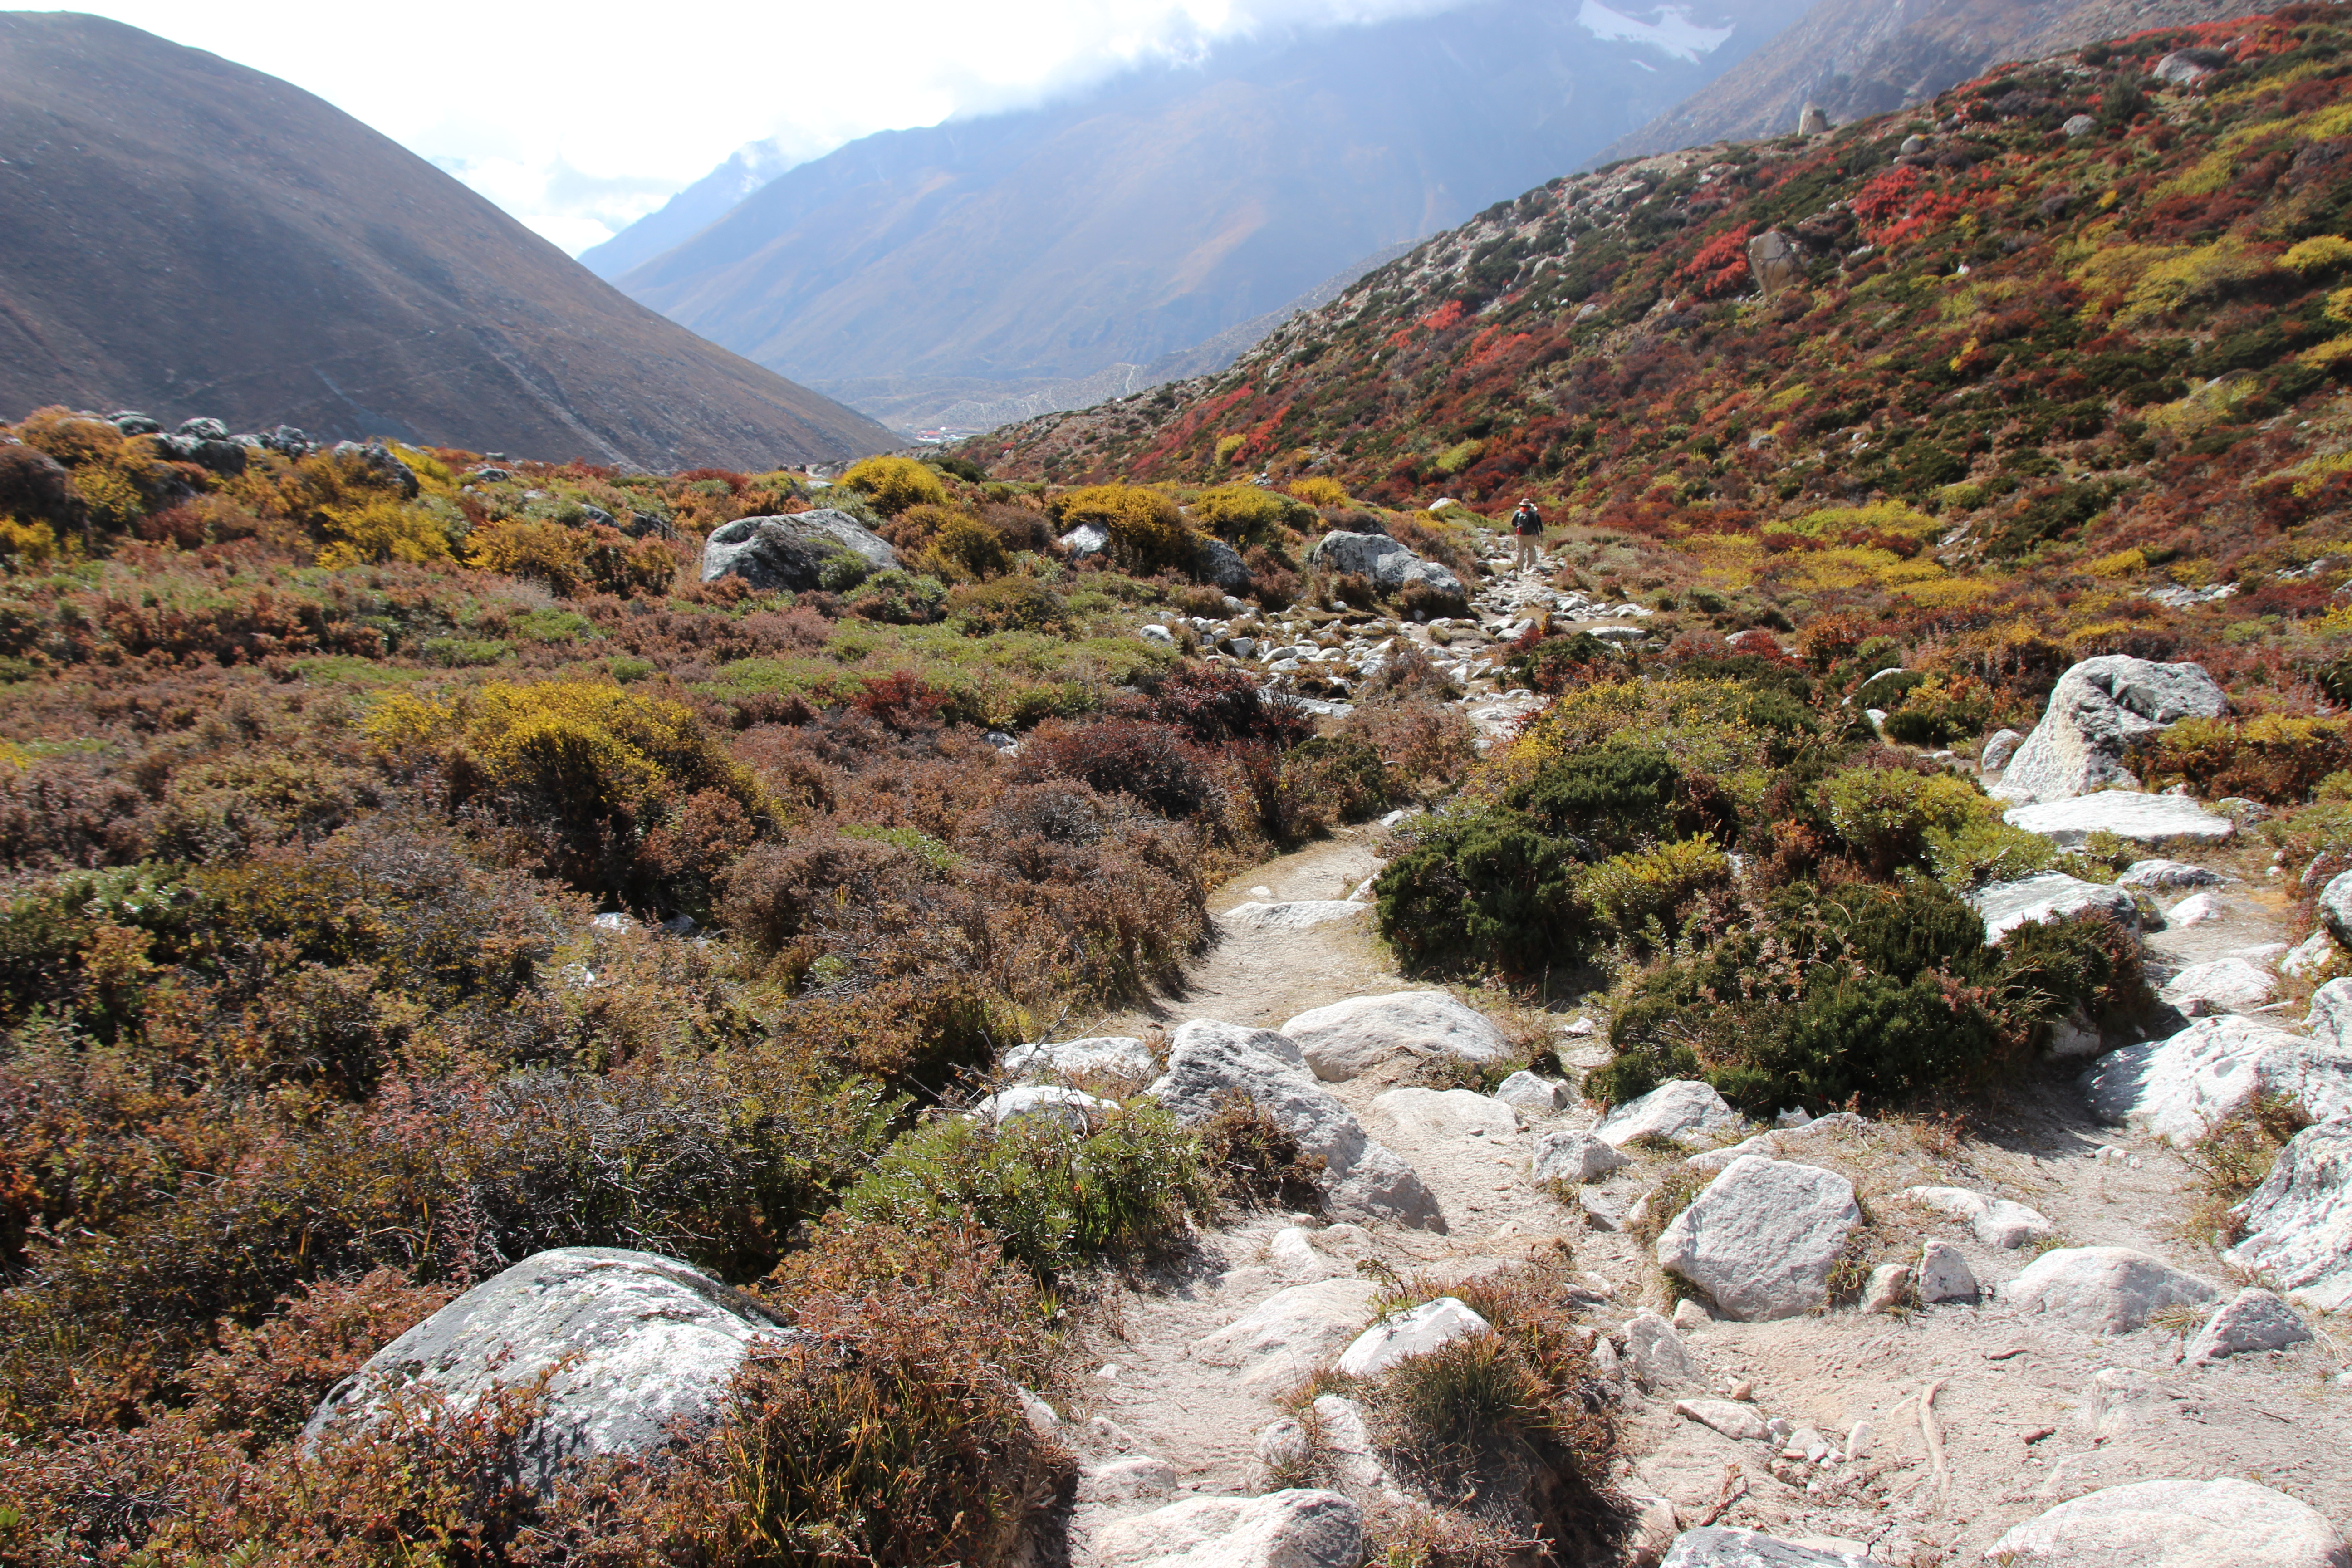 Trail to Chhukung Valley